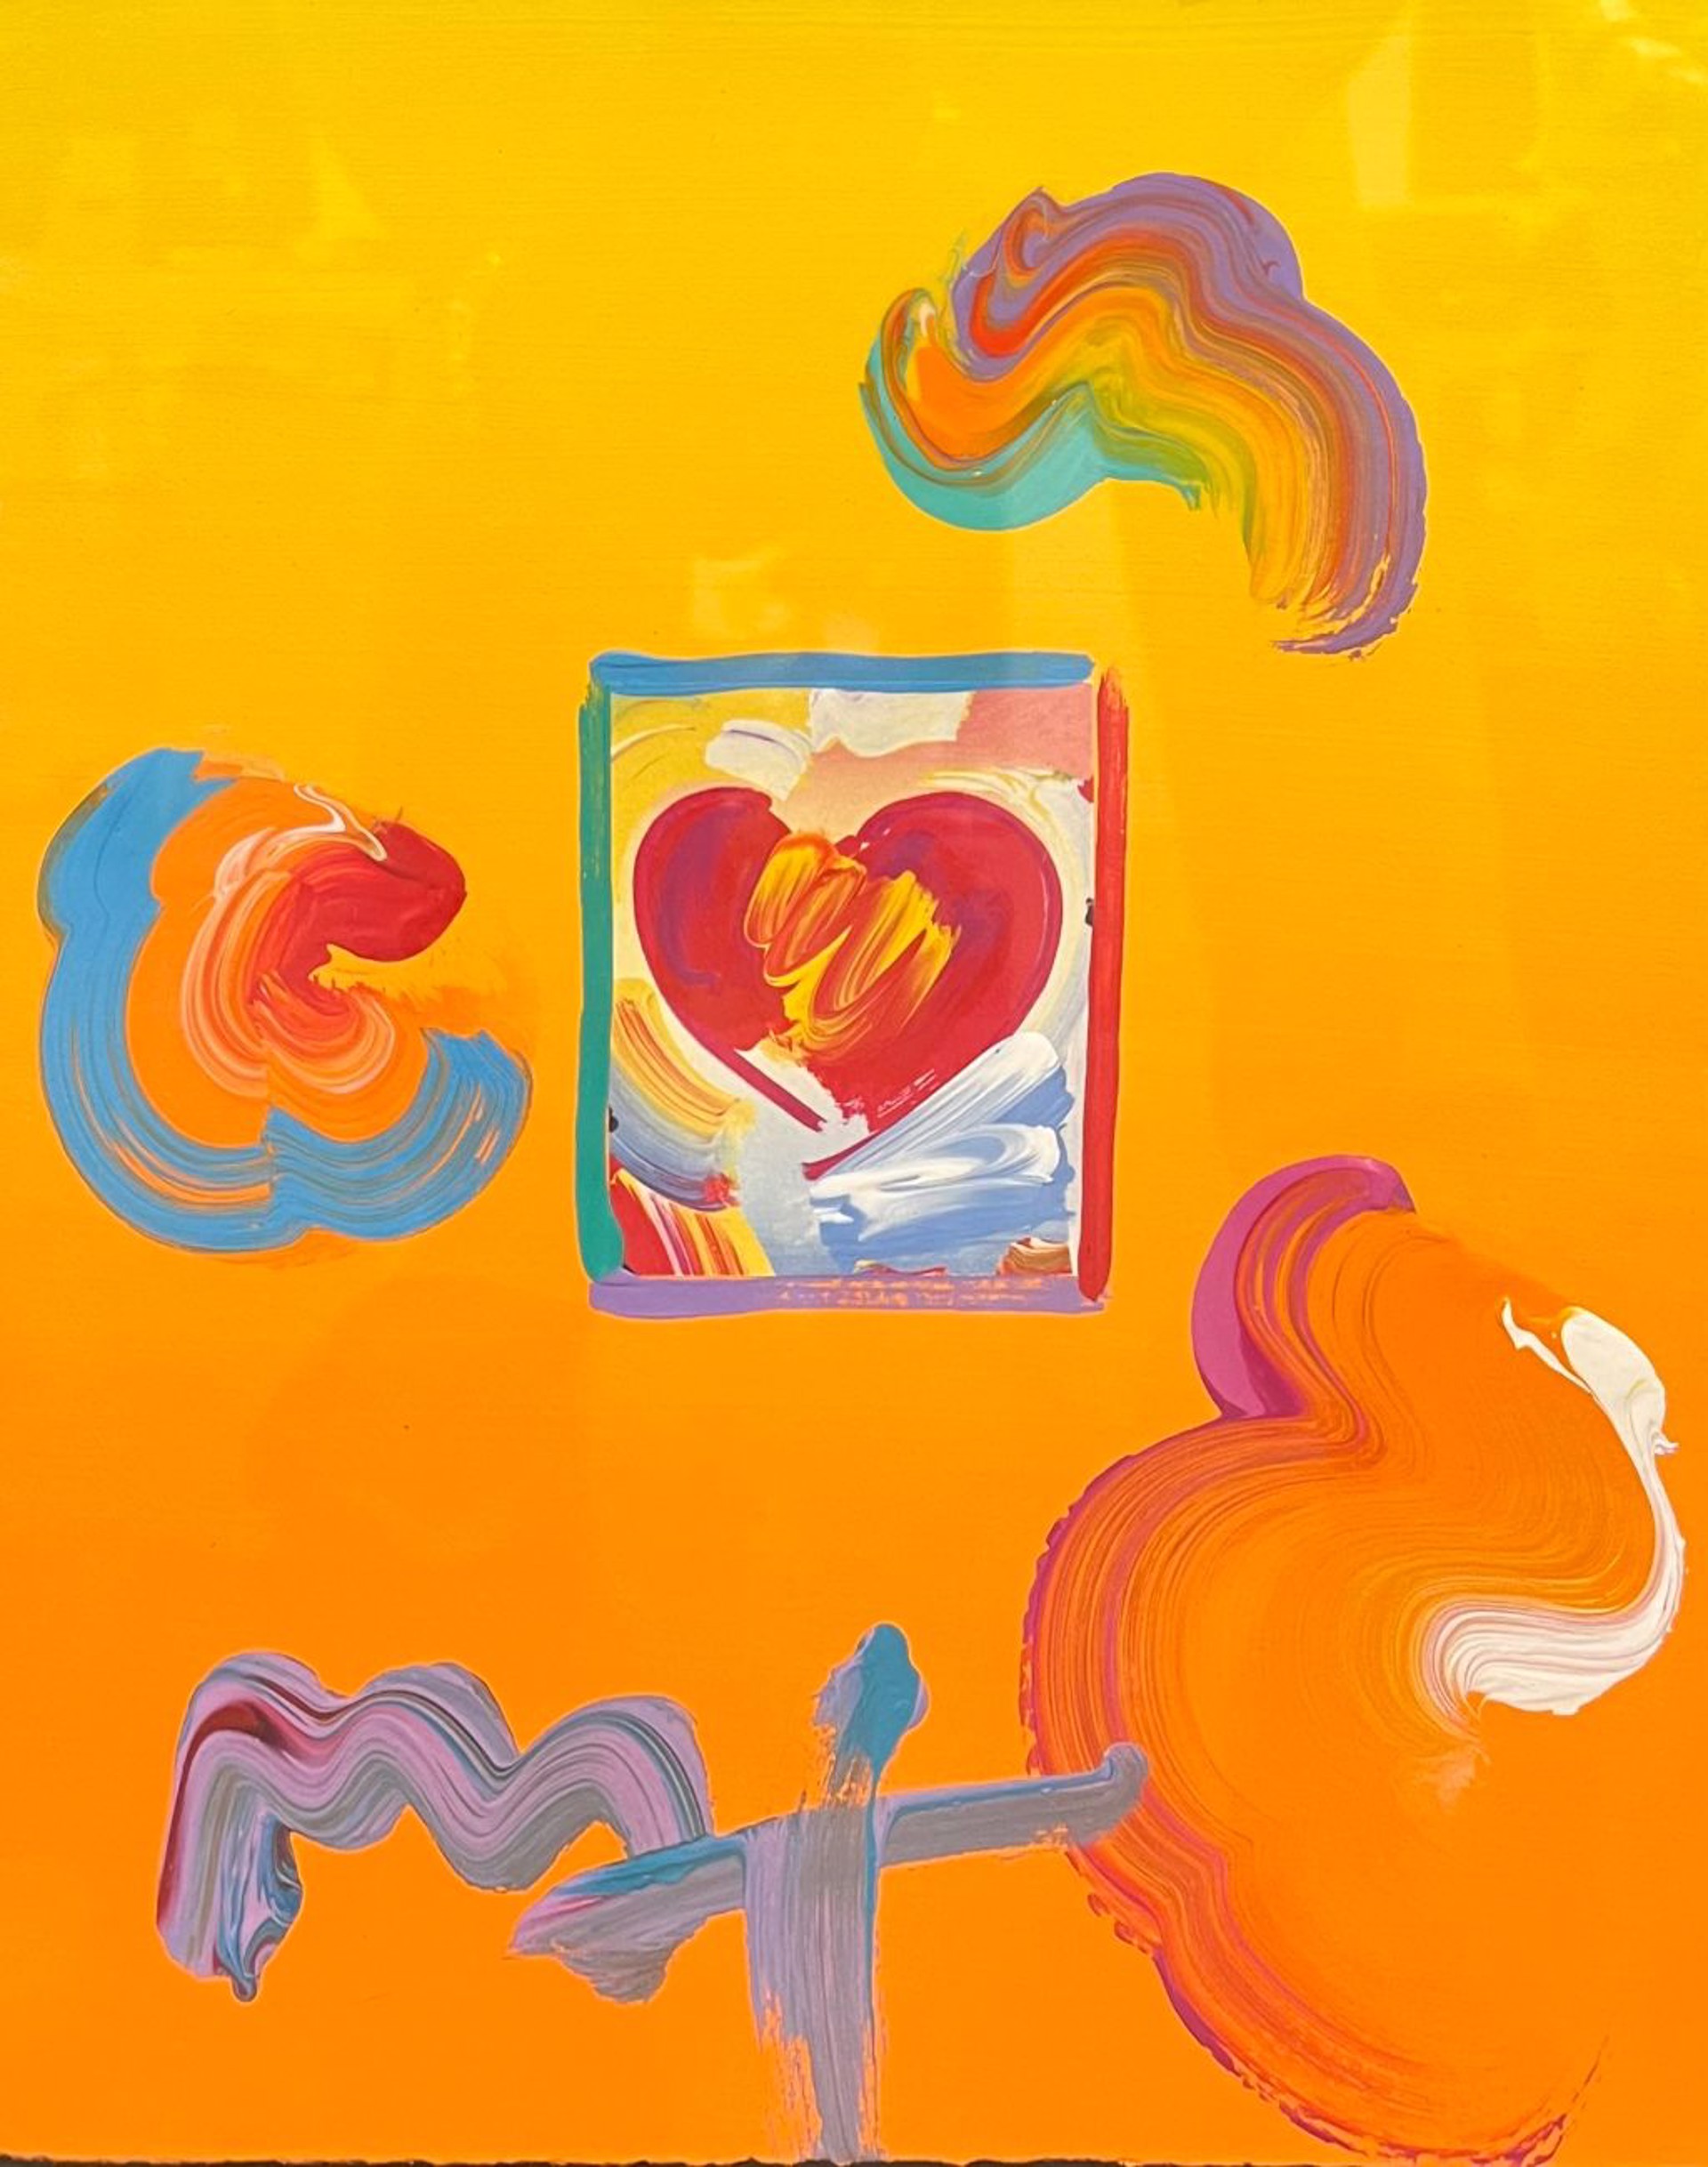 Heart Series by Peter Max